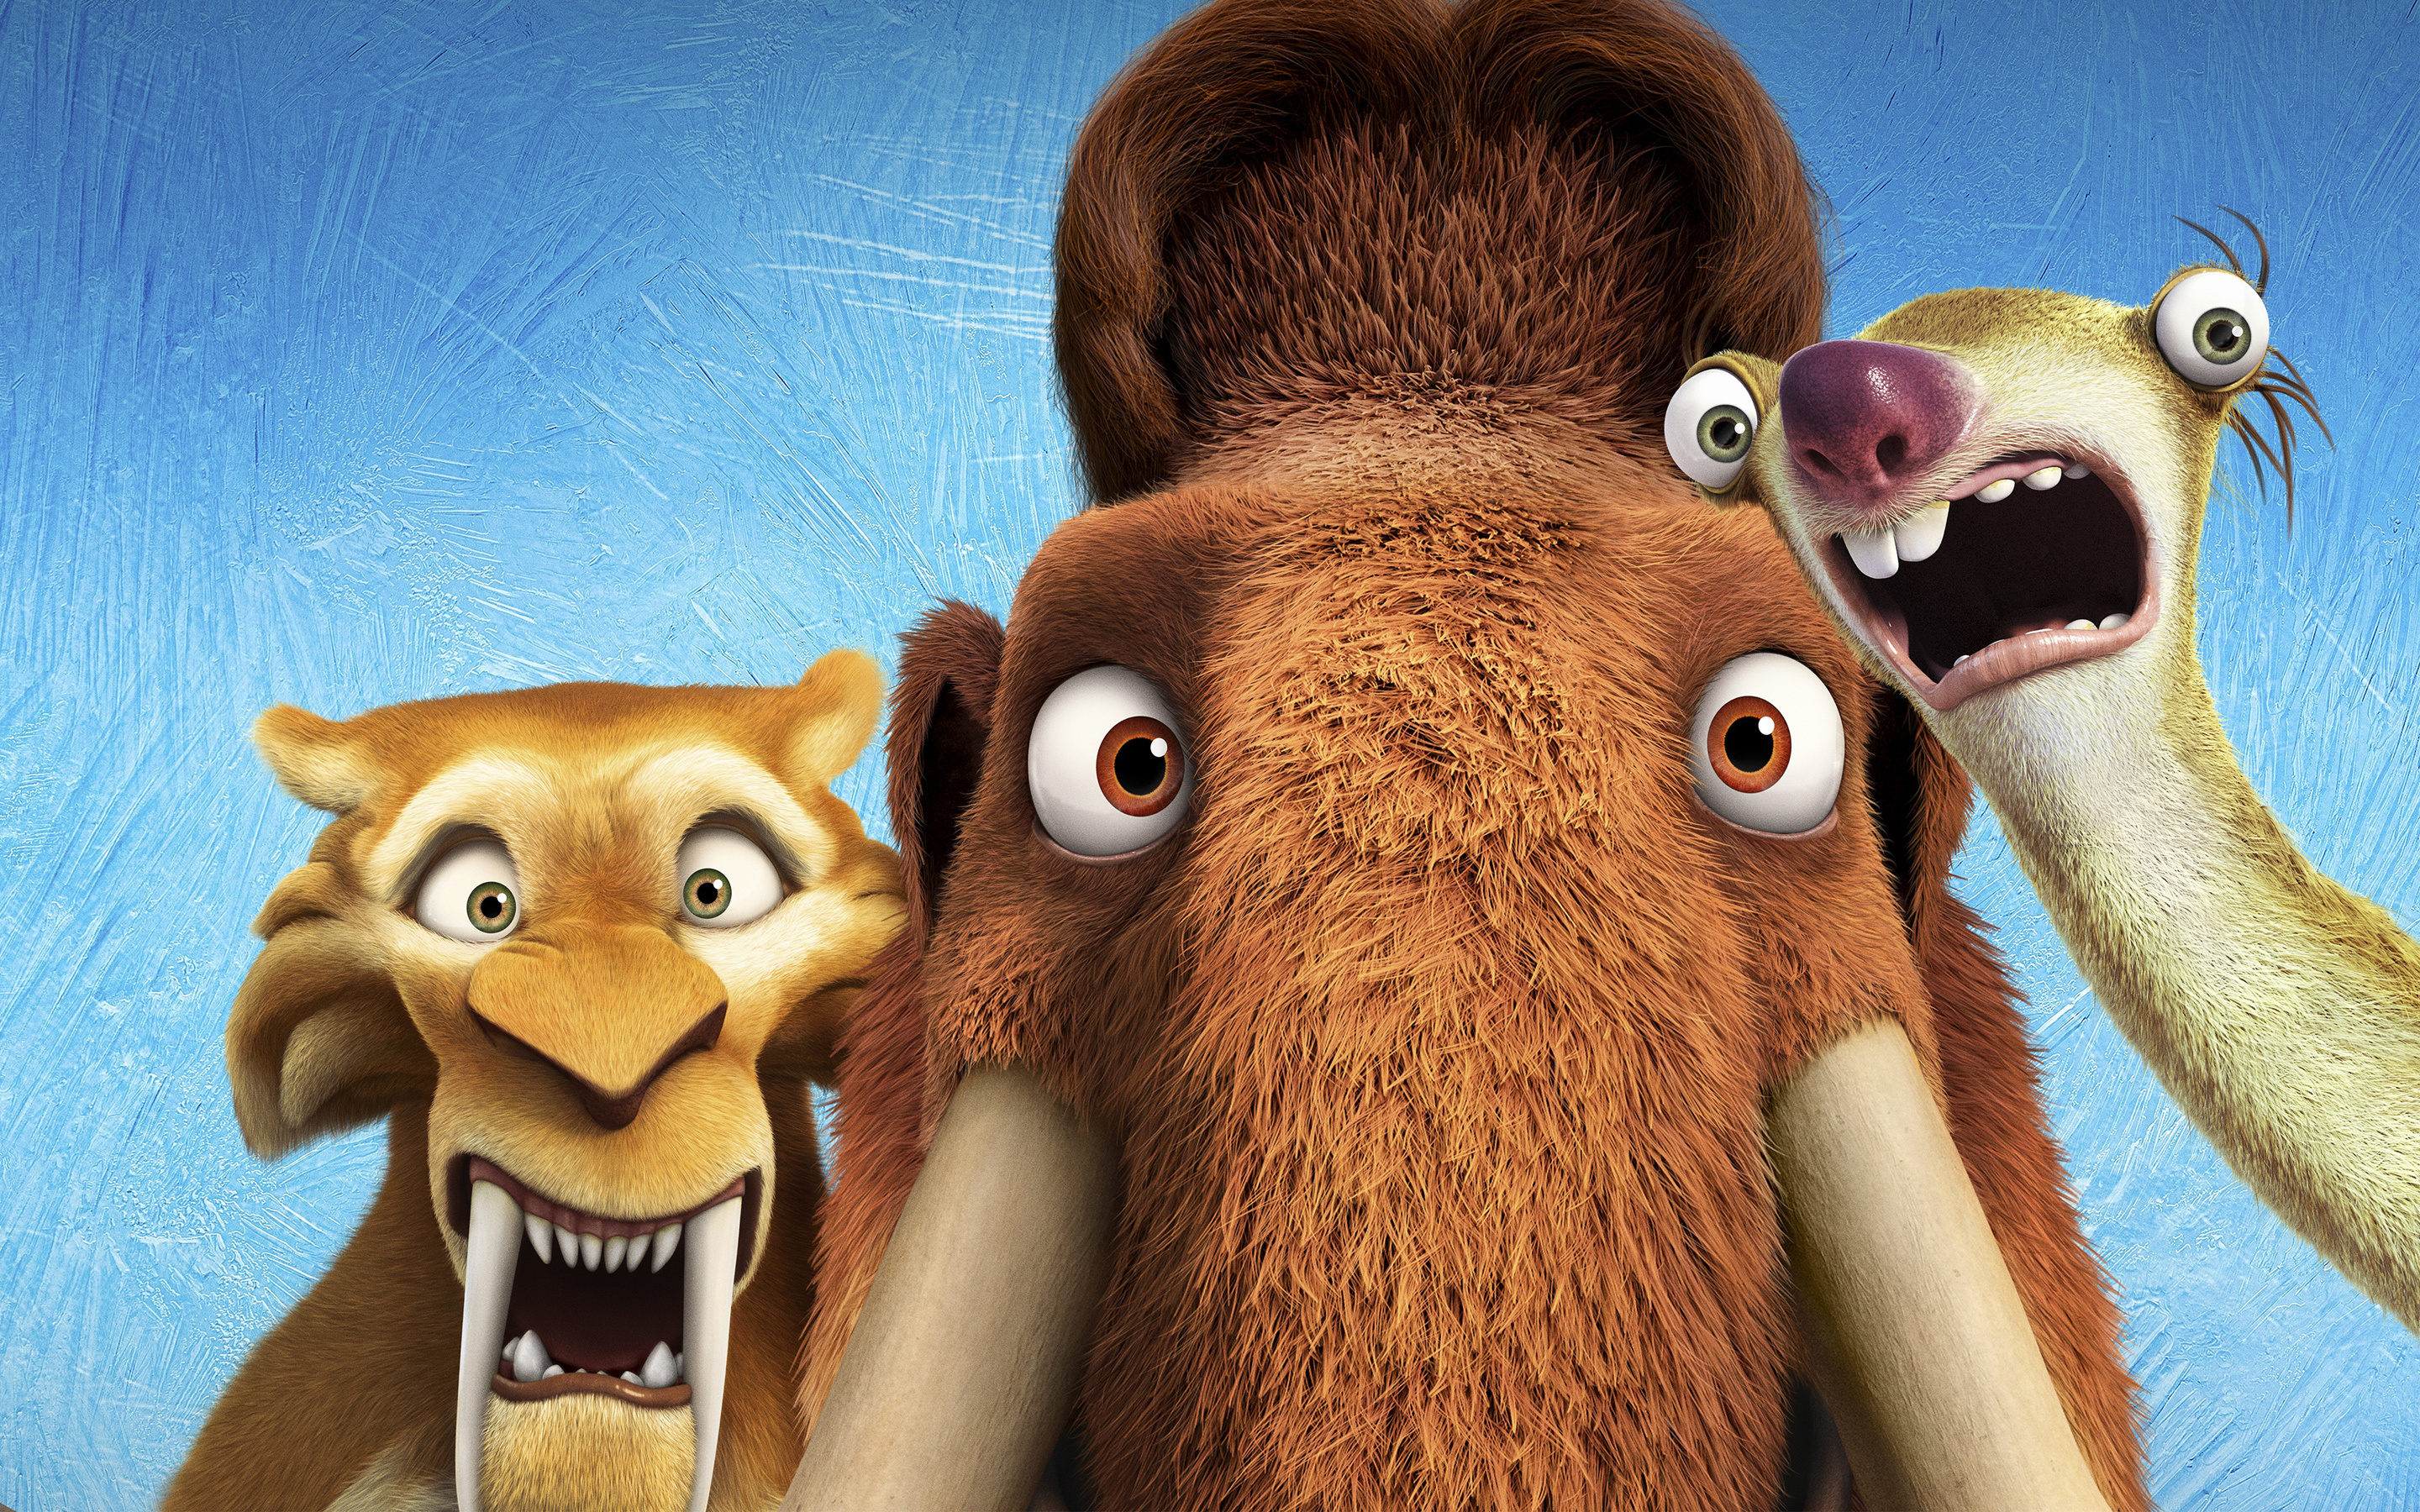 Diego and Manny, Sid (Ice Age) Wallpaper, 2880x1800 HD Desktop